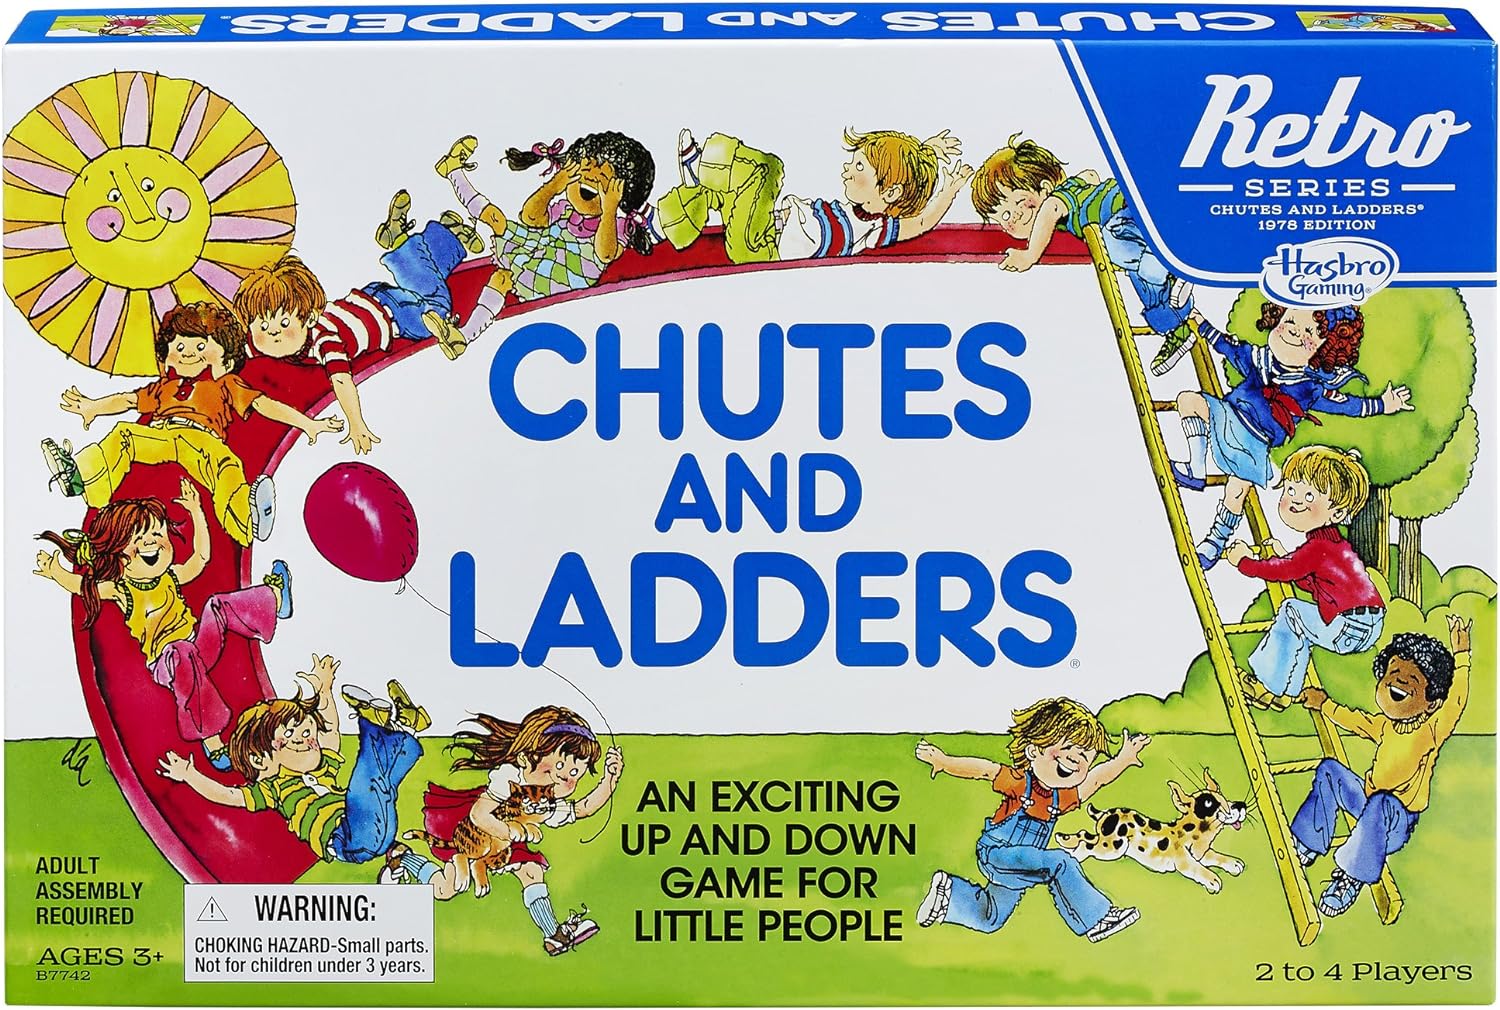 Amazon.com: Chutes and Ladders Game: Retro Series 1978 Edition : Hasbro:  Toys & Games